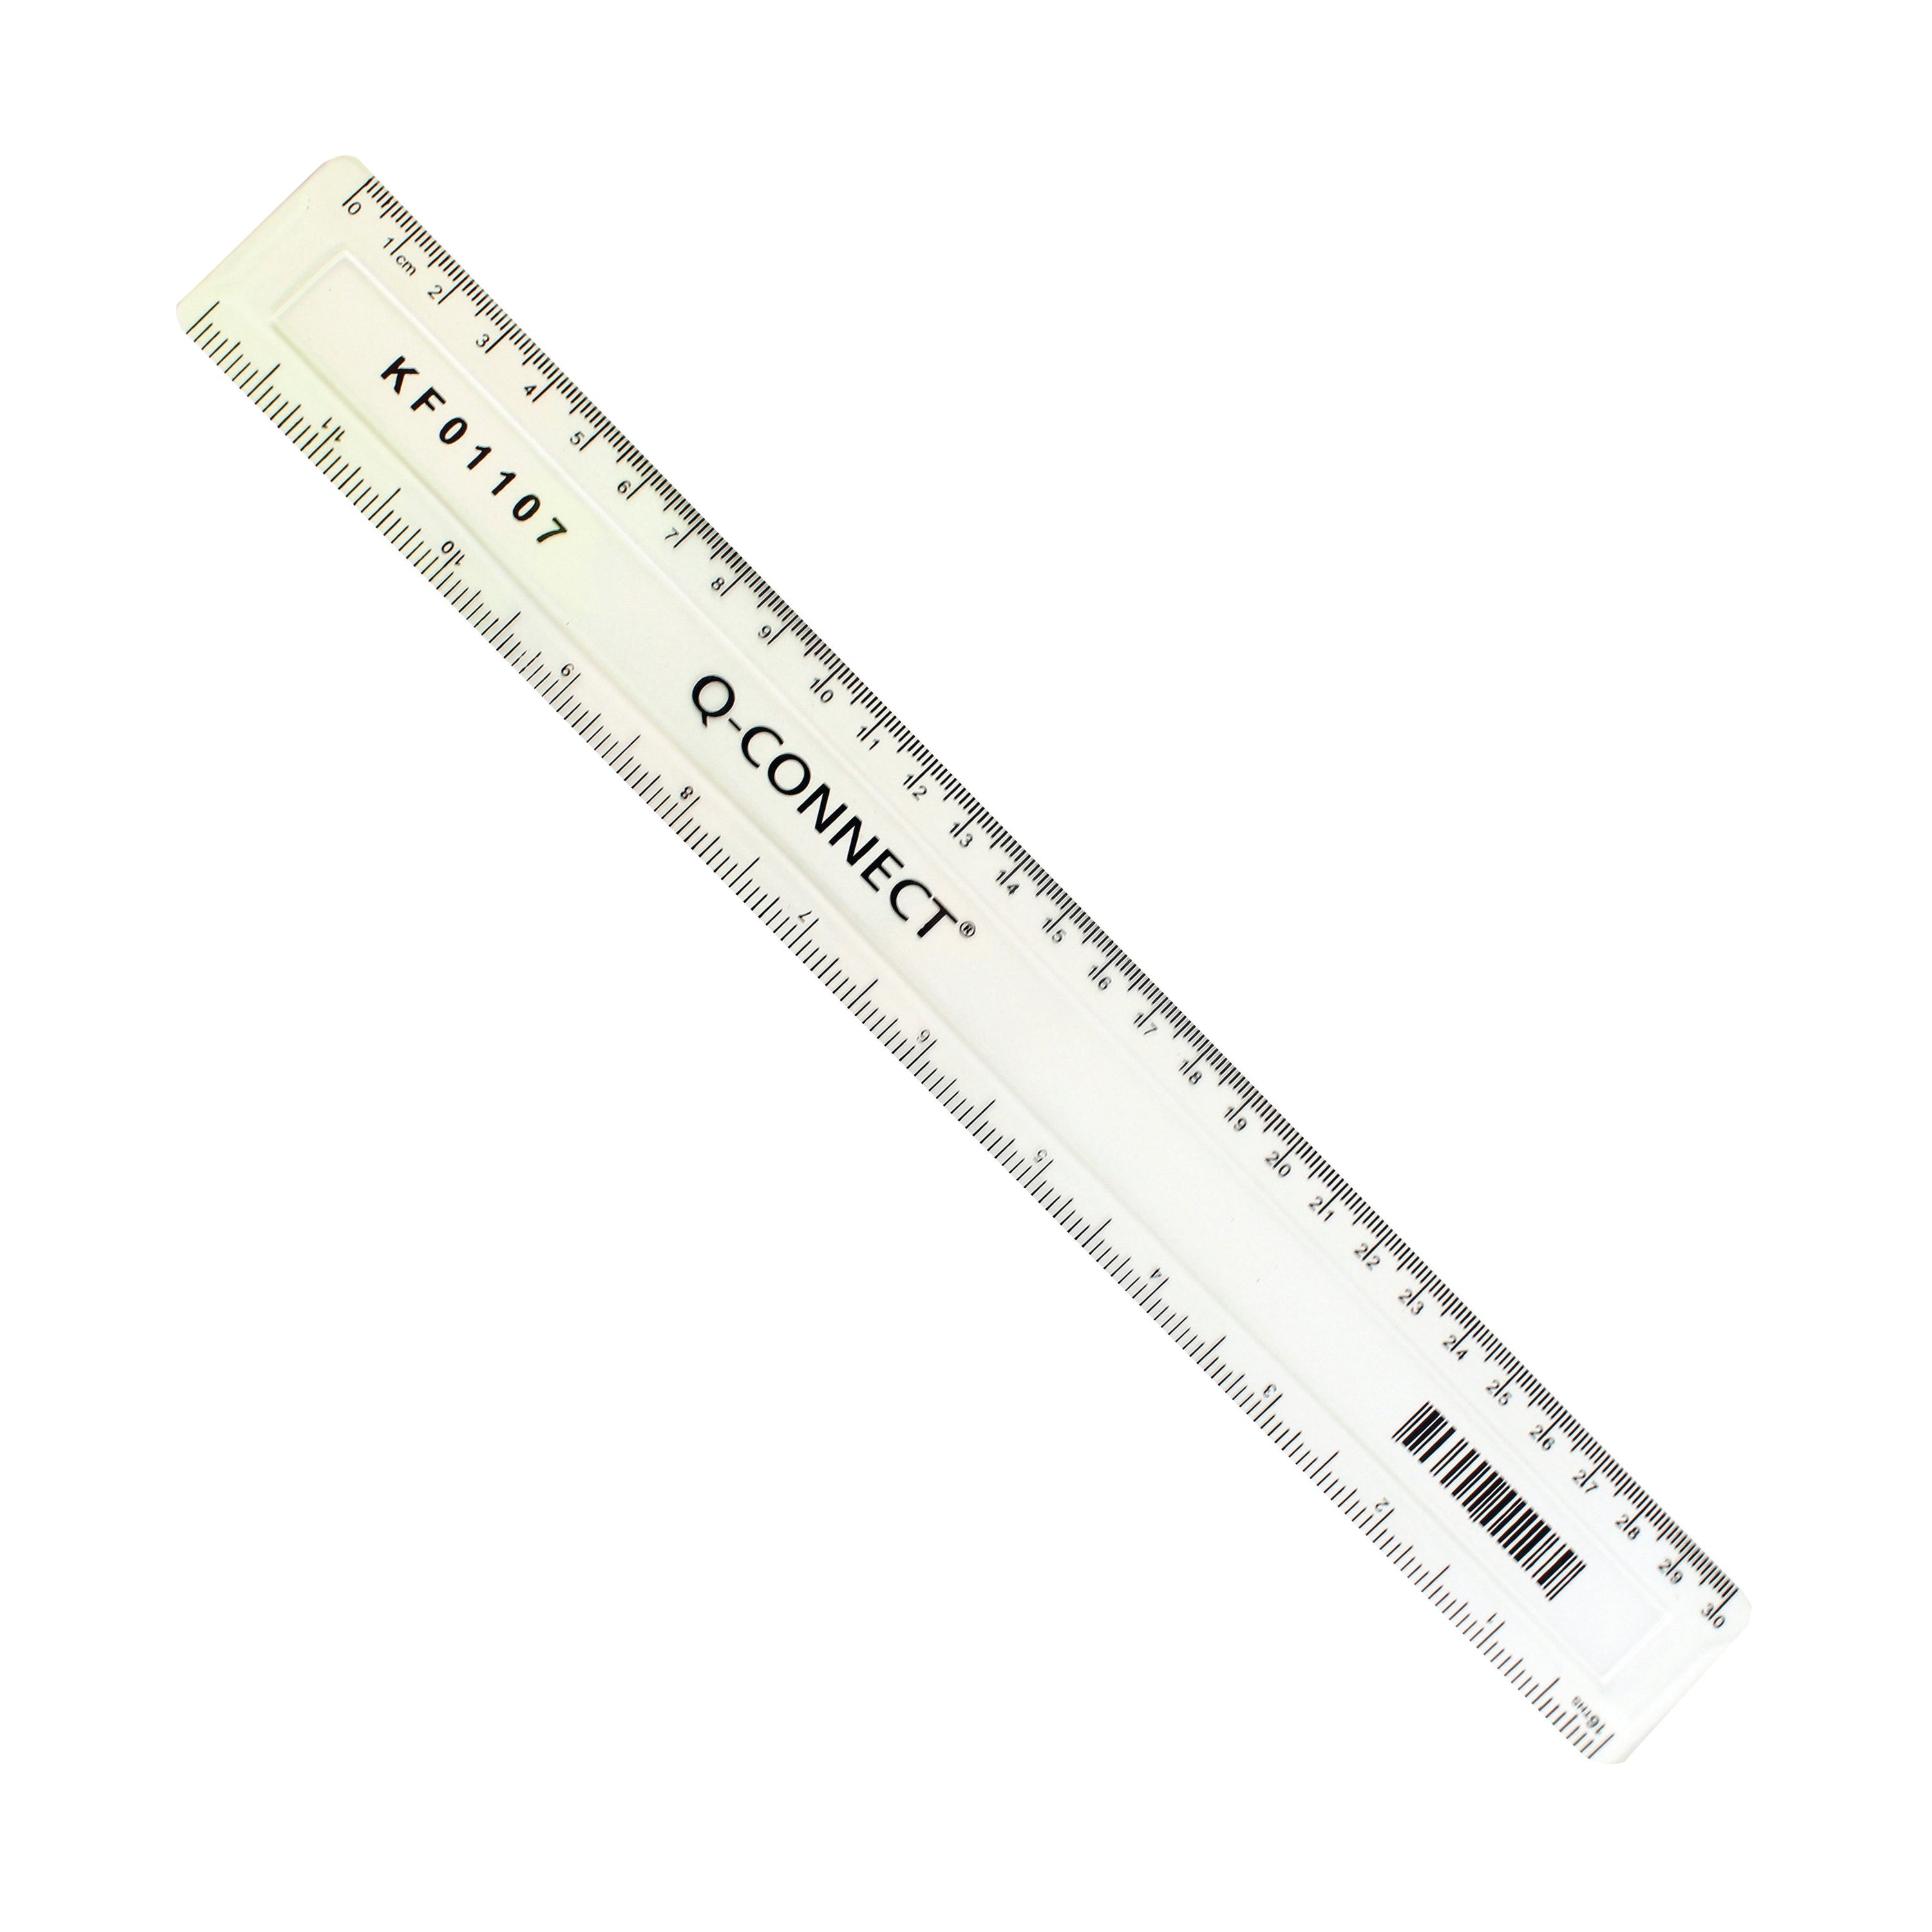 Q-Connect Acrylic Shatter Resistant Ruler 30cm Clear (Pack of 10) KF01107Q